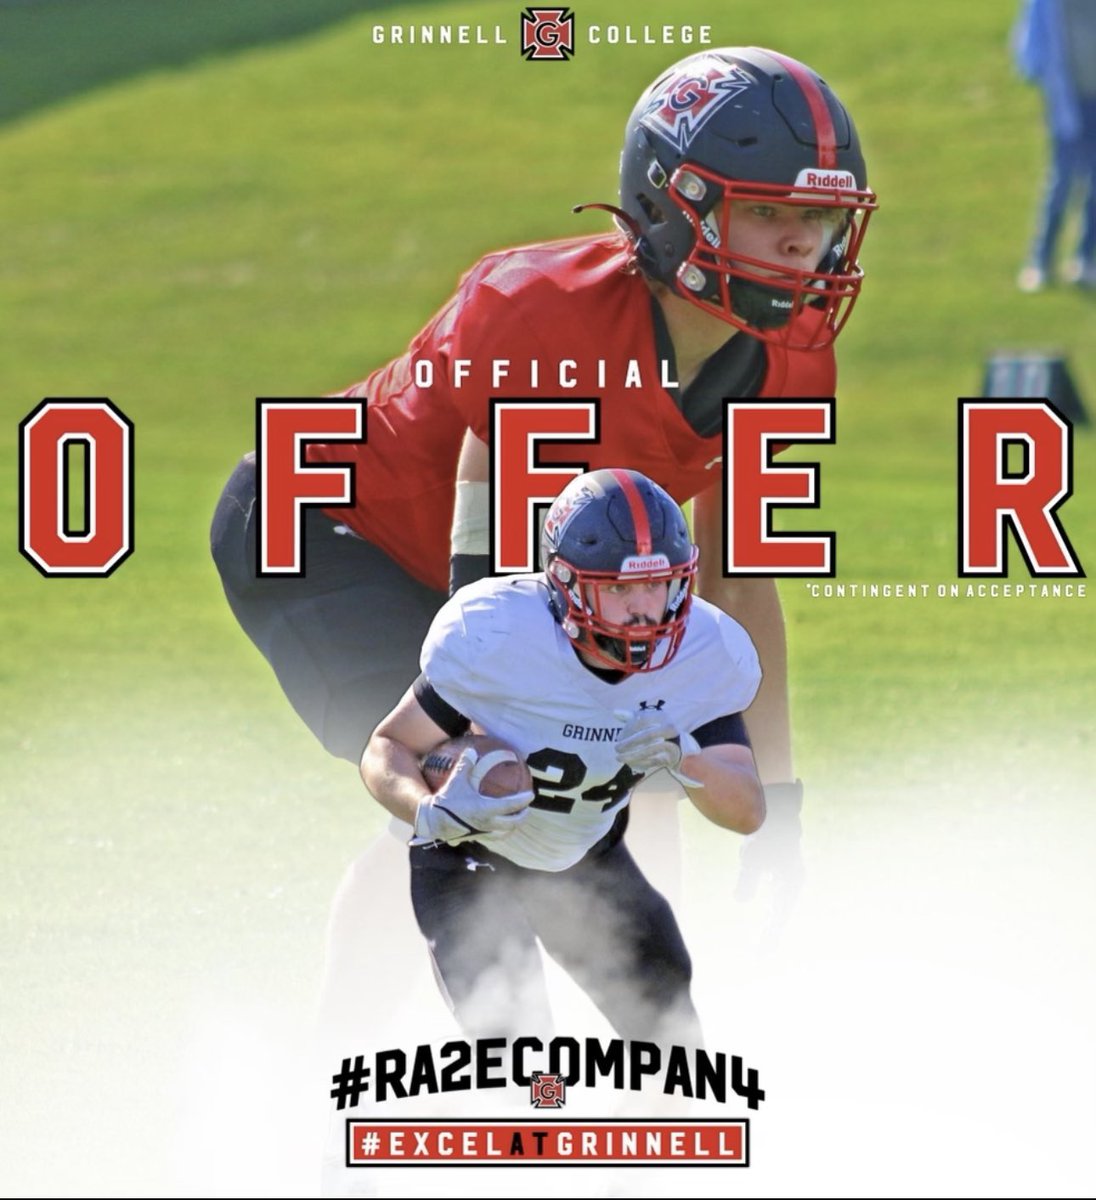 Excited to receive an offer to continue to make an impact on the field and in the classroom @CoachBlalock44 Thank you for this opportunity and I look forward to staying in touch and learning more about @Grinnell_FB #ExcelatGrinnell #RA2ECOMPAN4